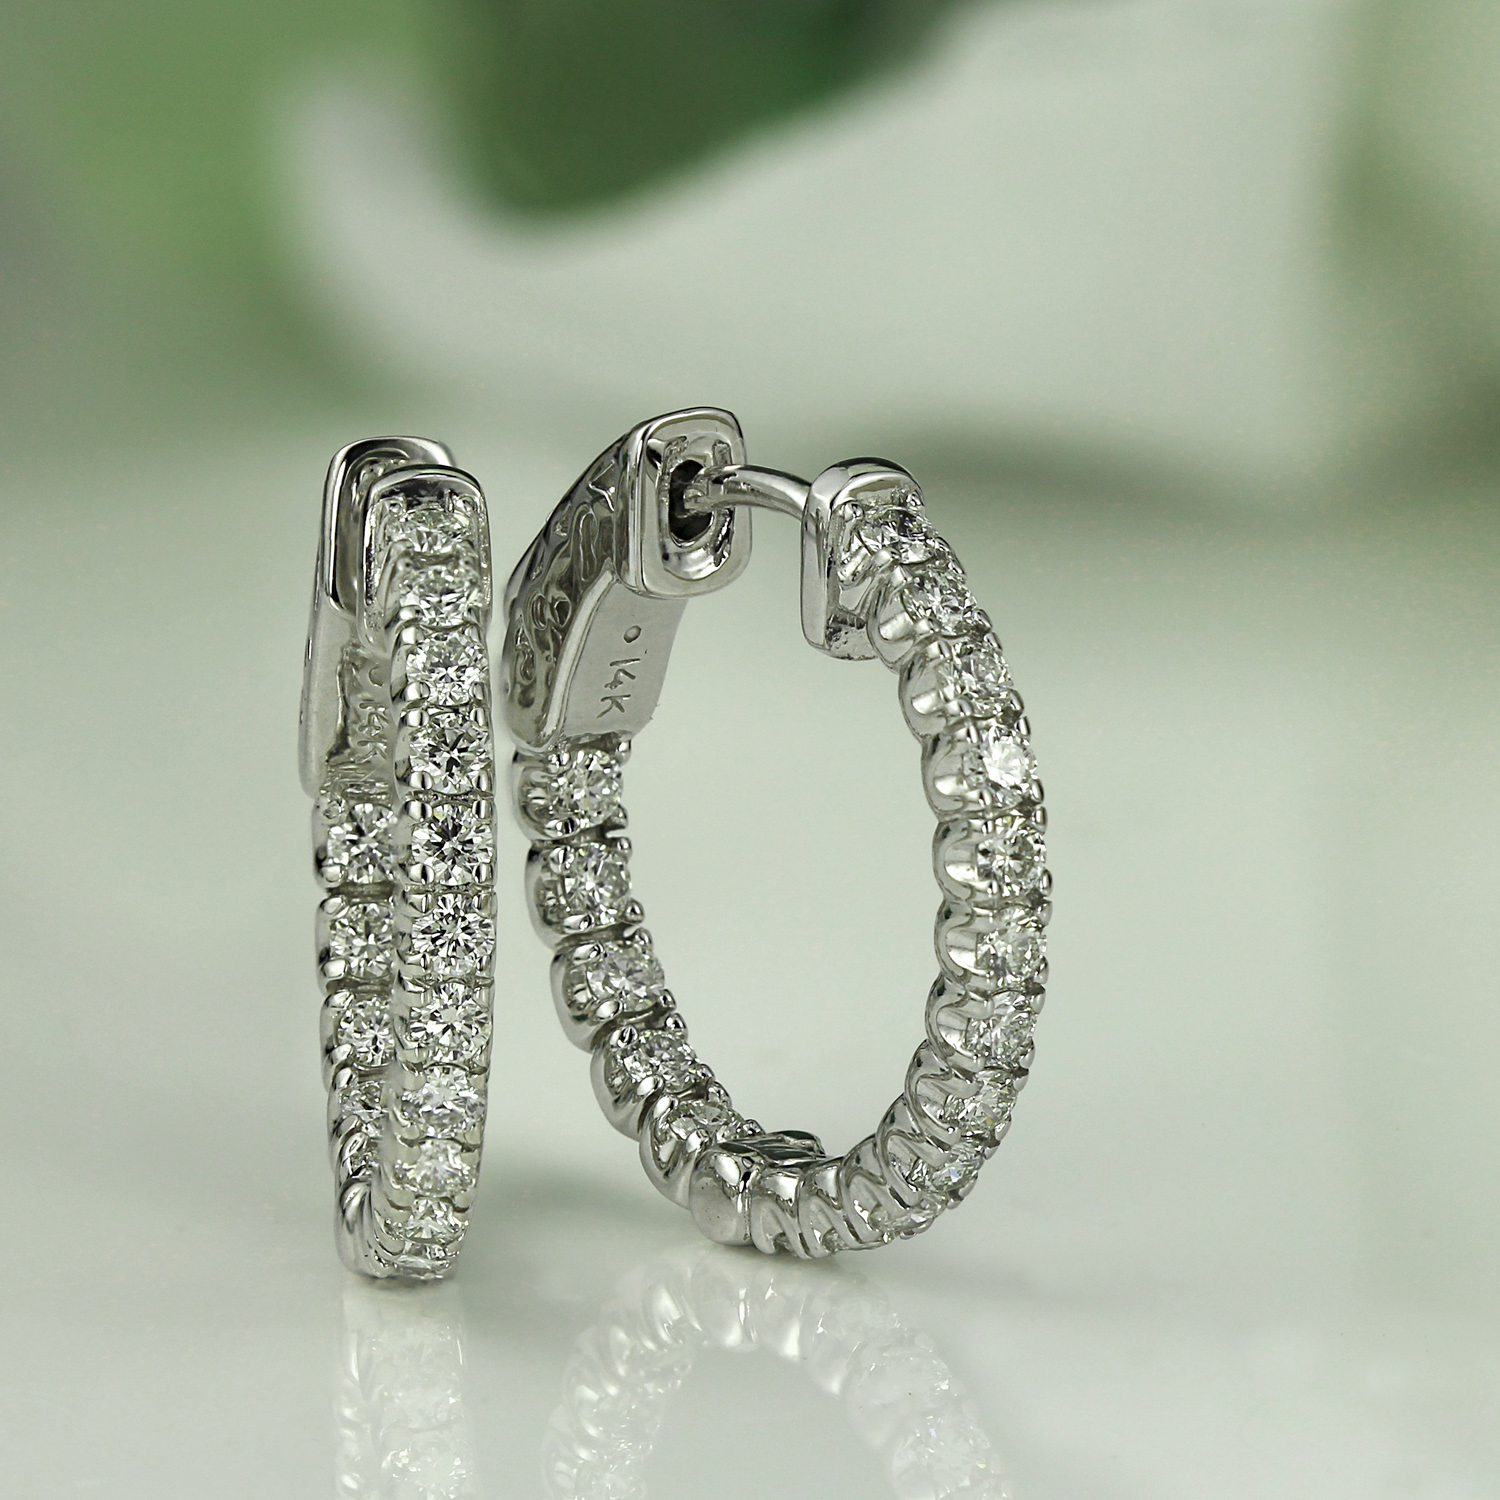 14k White Gold Small Round Diamond Hoop Earrings 0.50 ct. tw. (H-I, SI1